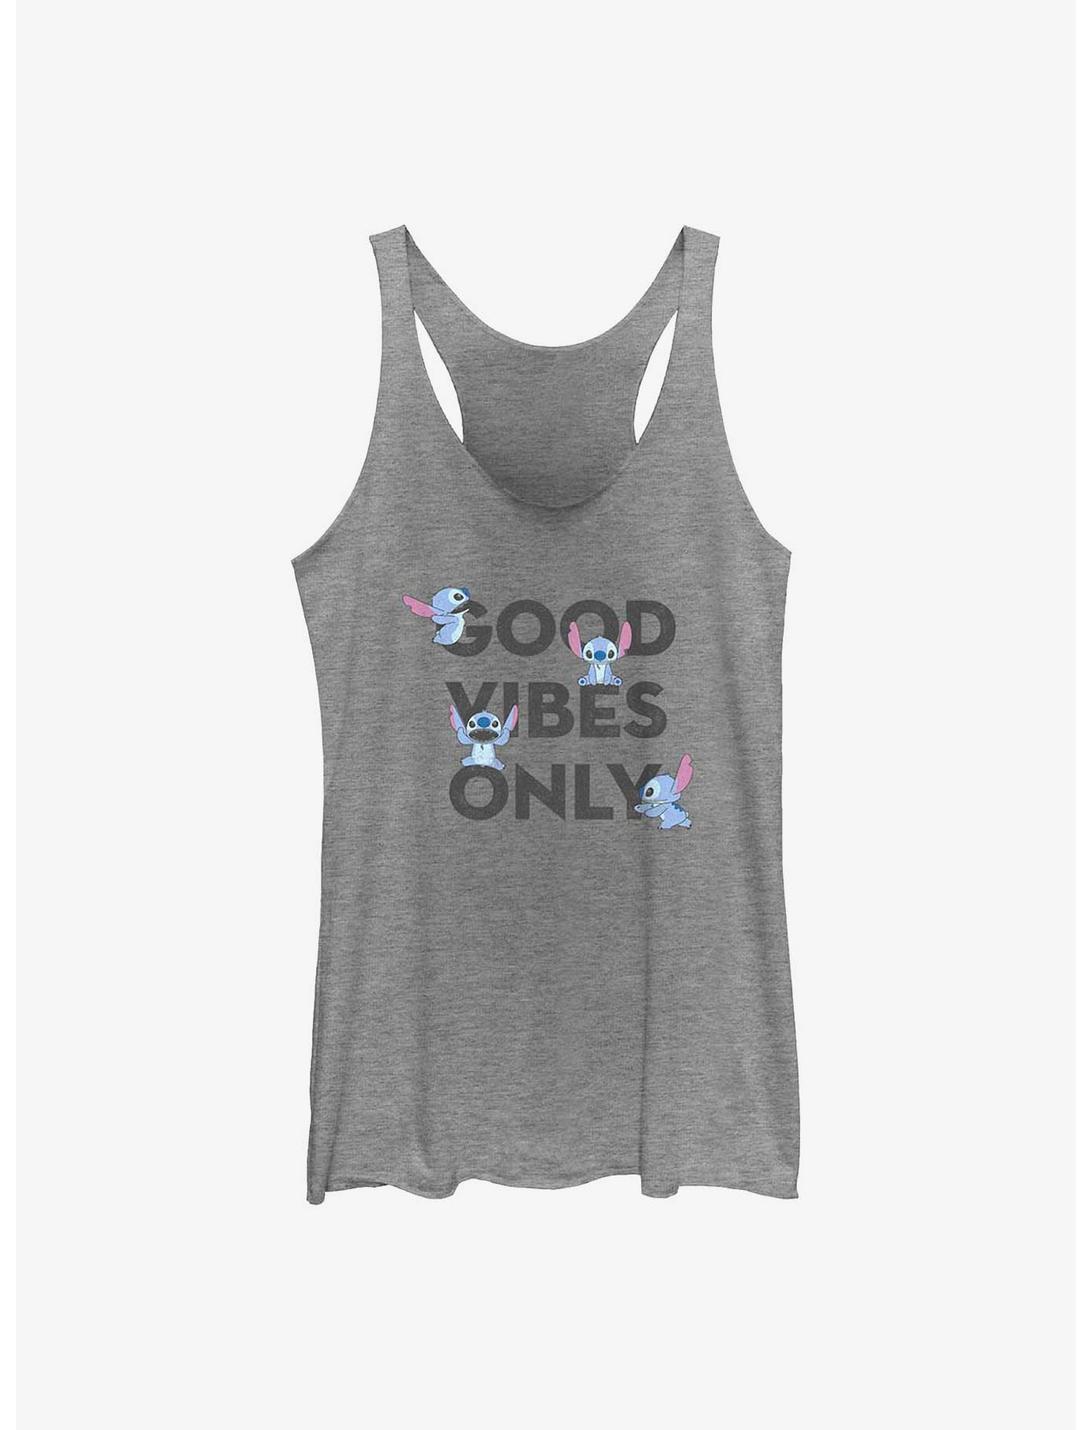 Disney Lilo & Stitch Good Vibes Only Womens Tank Top, GRAY HTR, hi-res